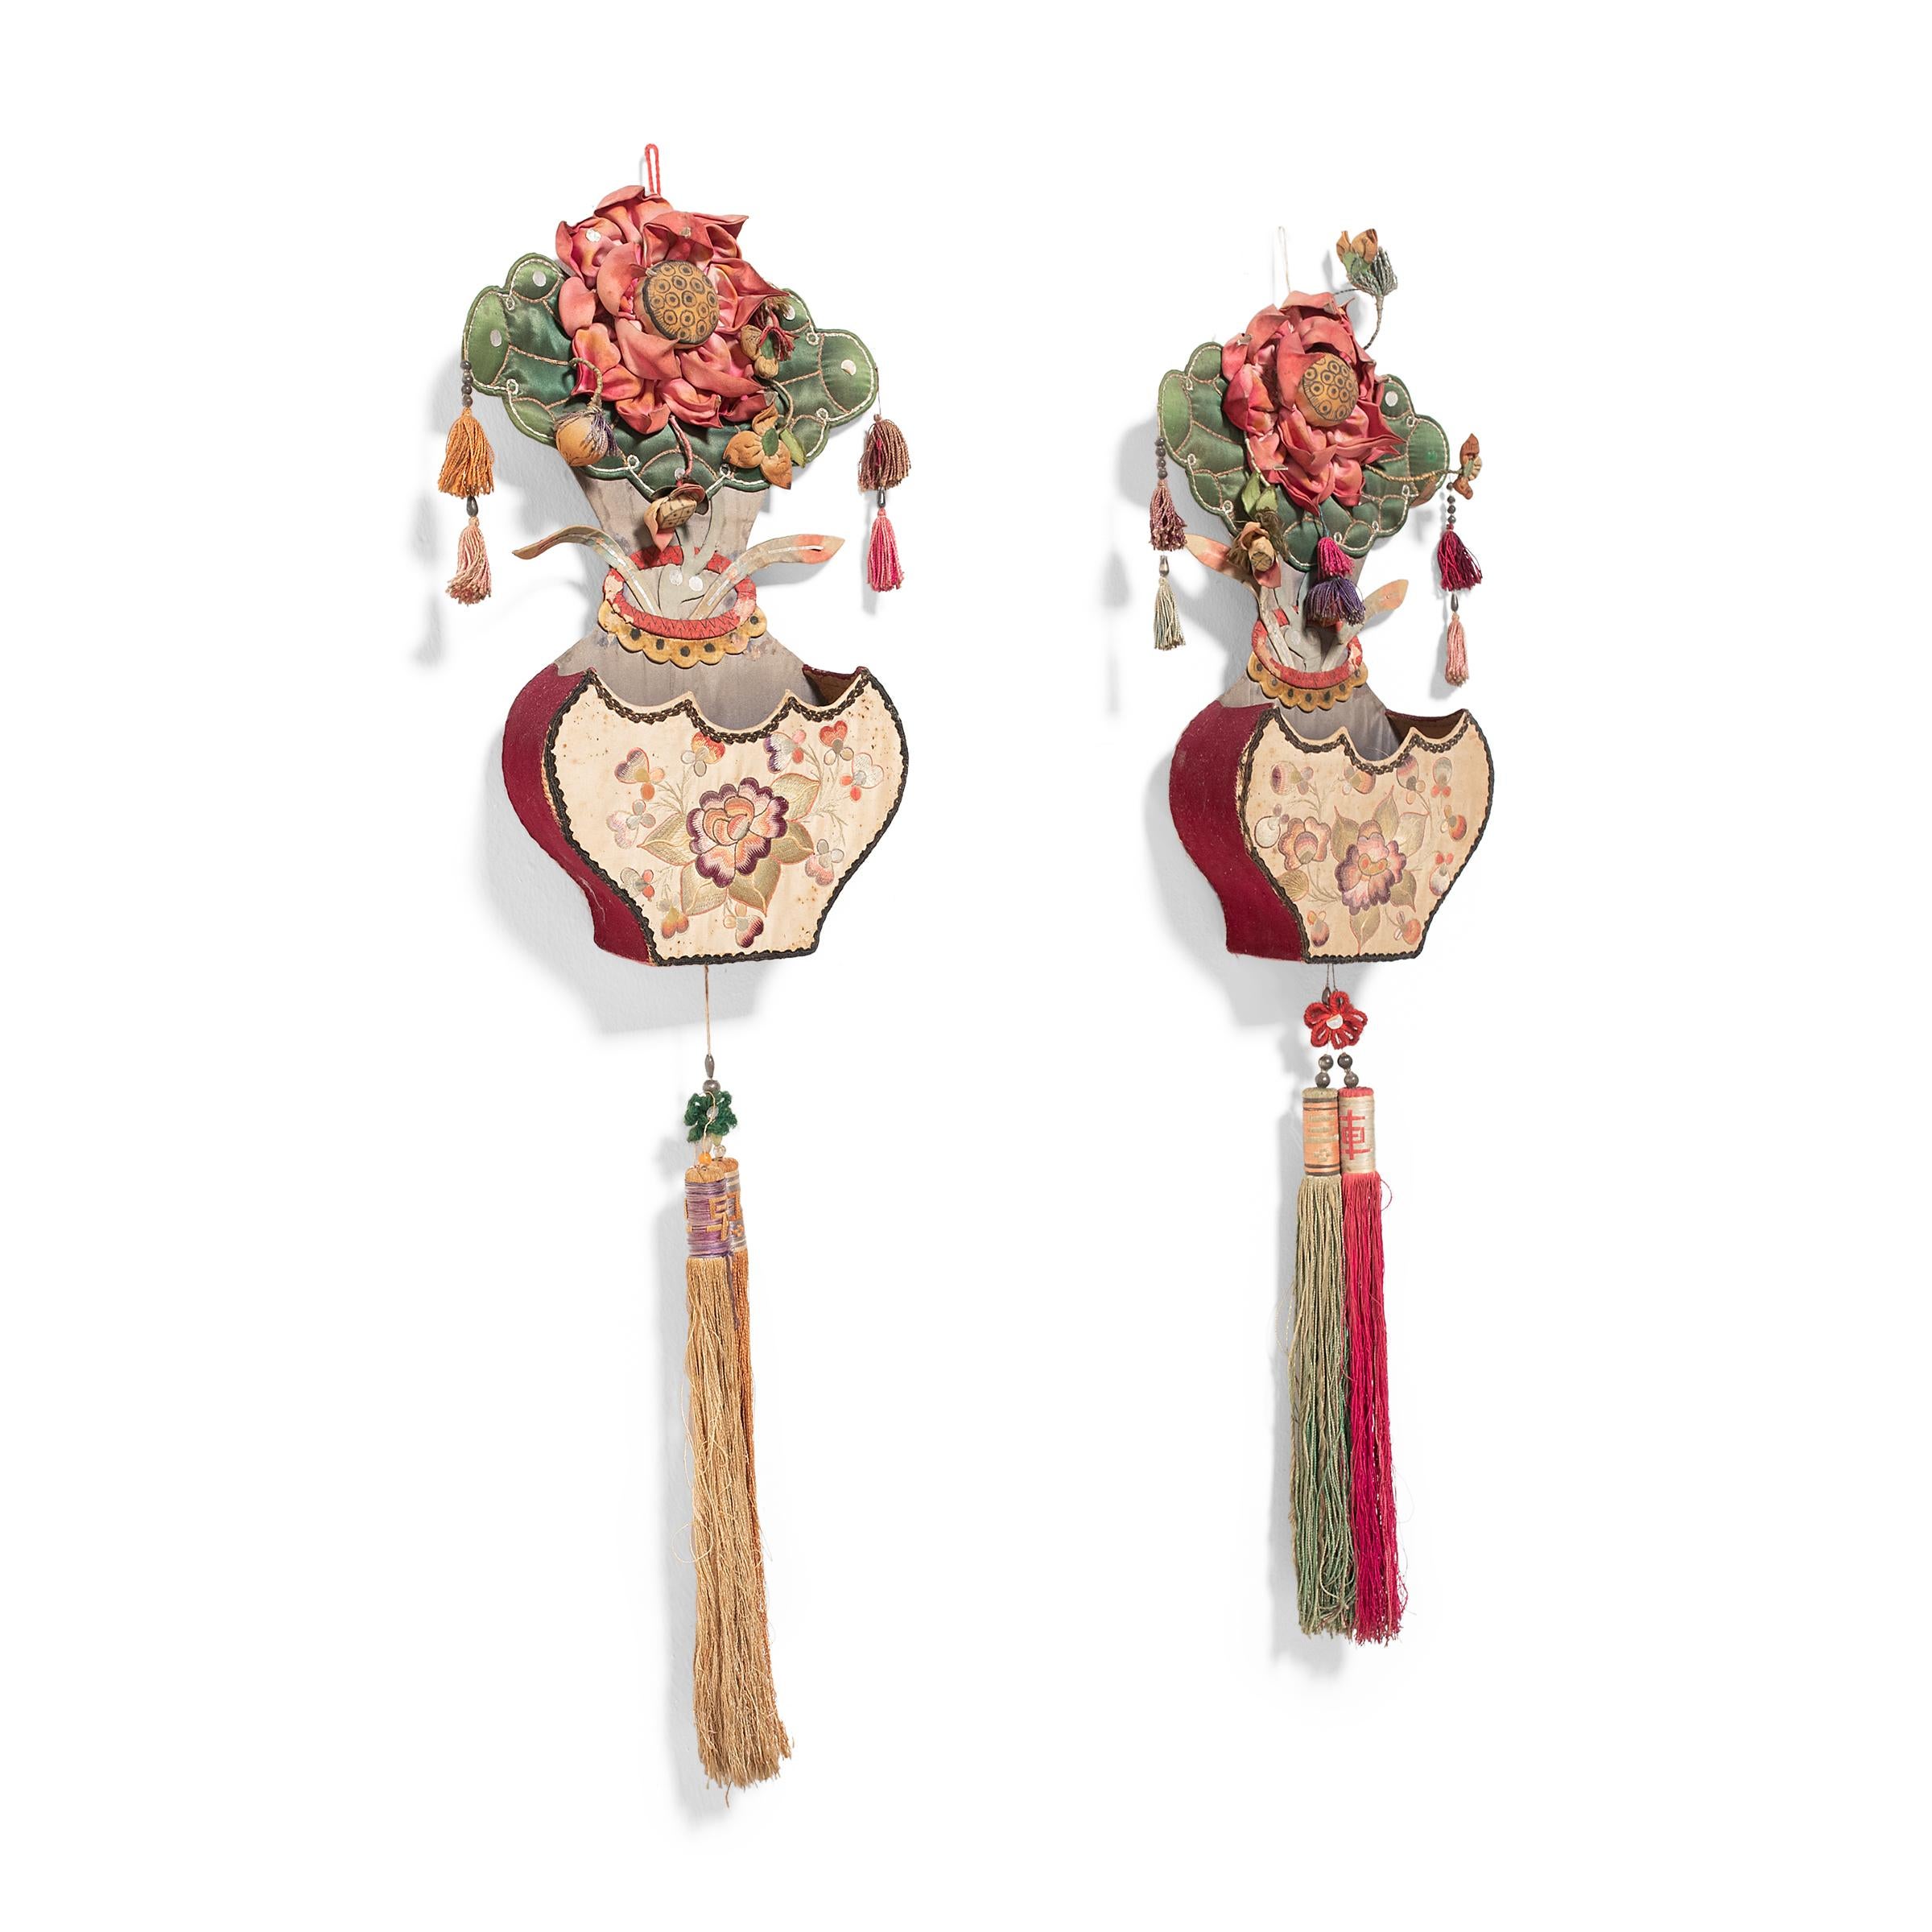 This pair of early 20th century wall pockets is crafted from colorful silks in the shape of two porcelain vases filled with lotus blossoms. Folds of pink silk comprise a large lotus flower atop each pocket, backed by a large lotus leaf of quilted